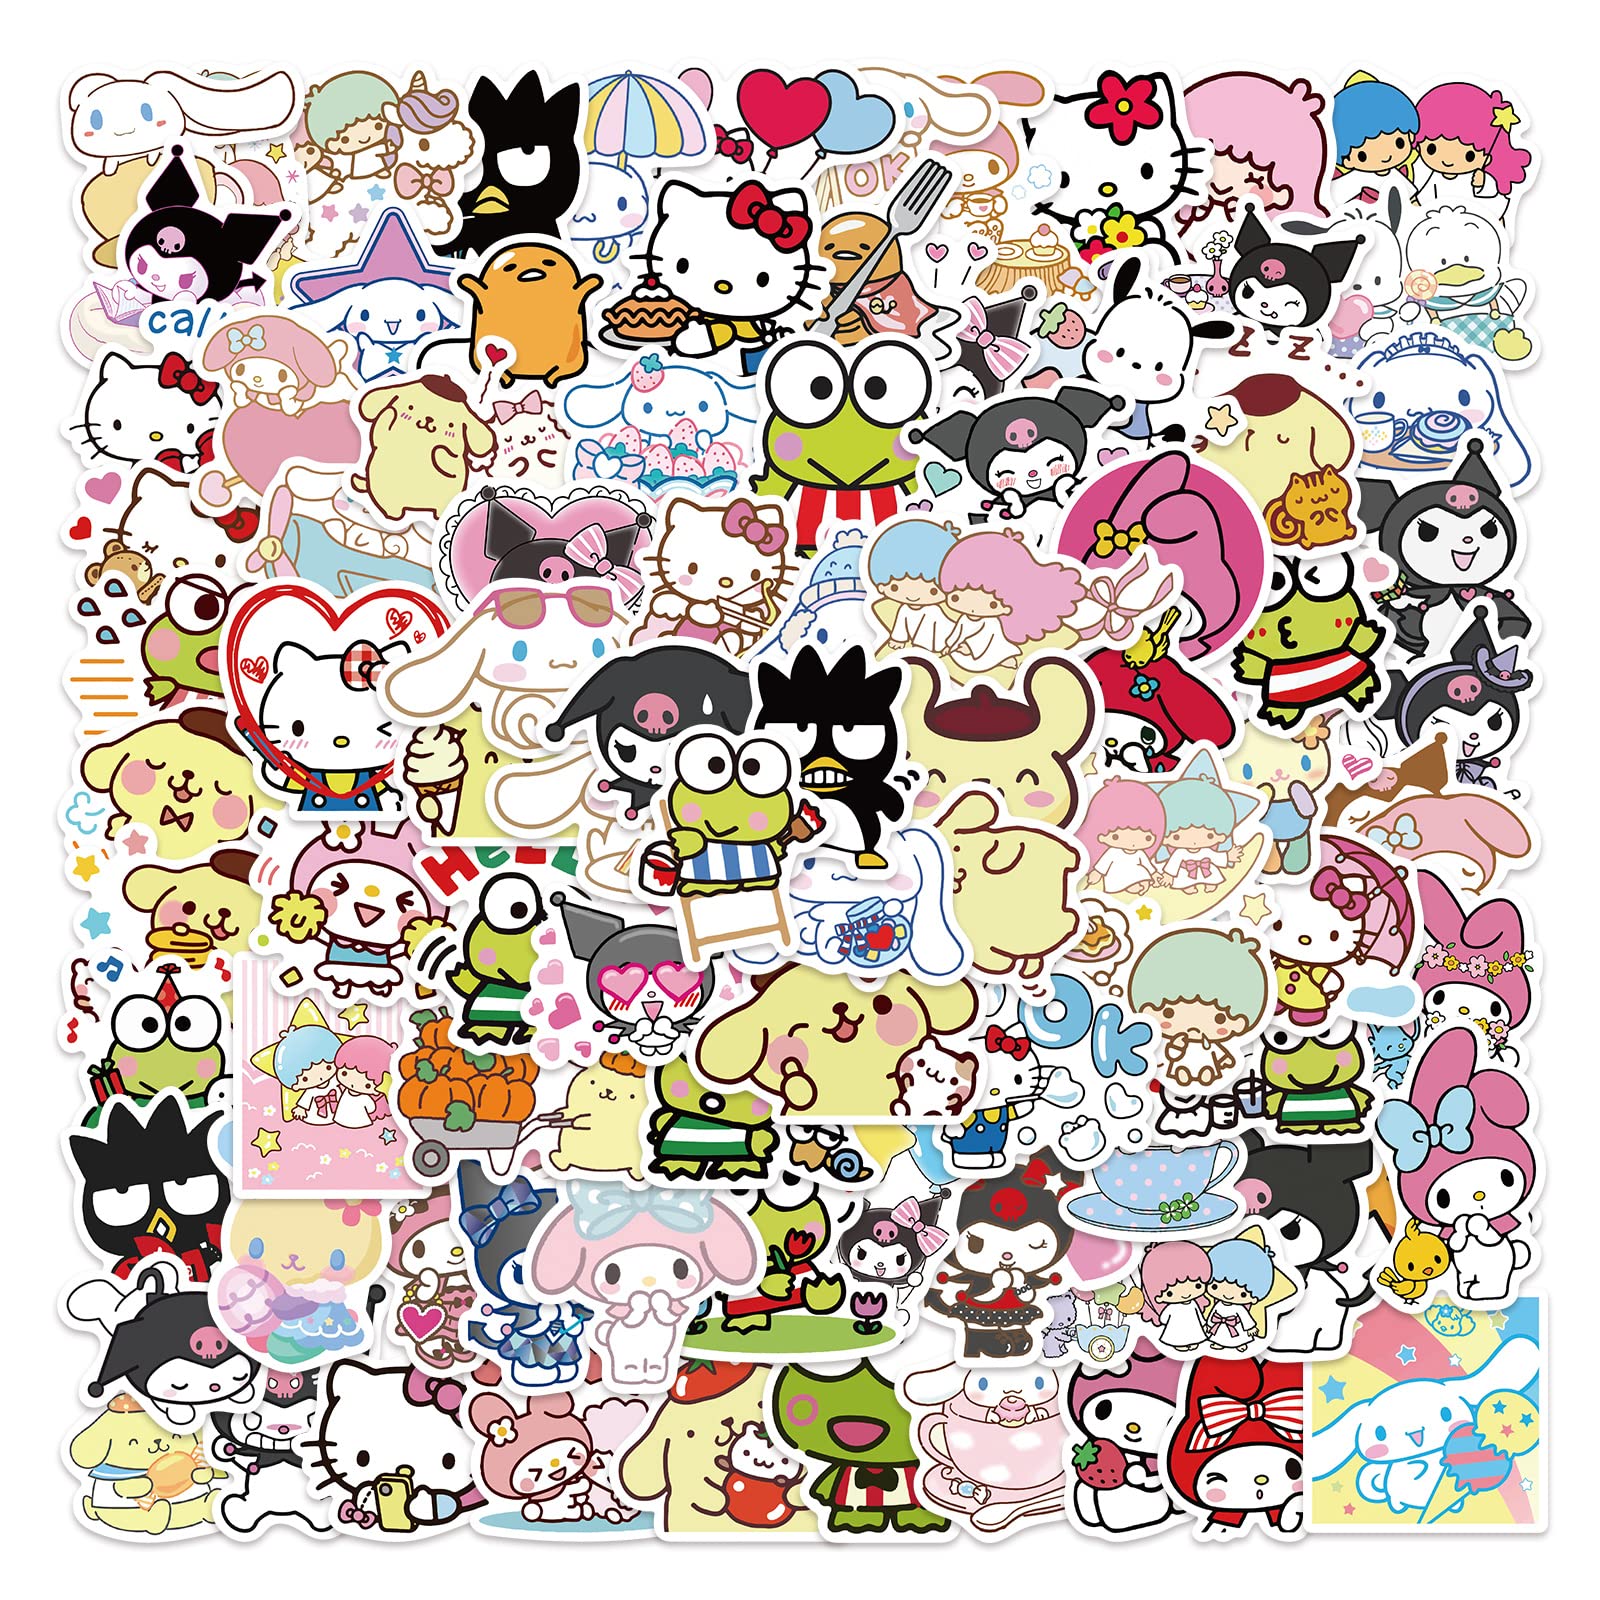 A large collage of various cartoon characters - Keroppi